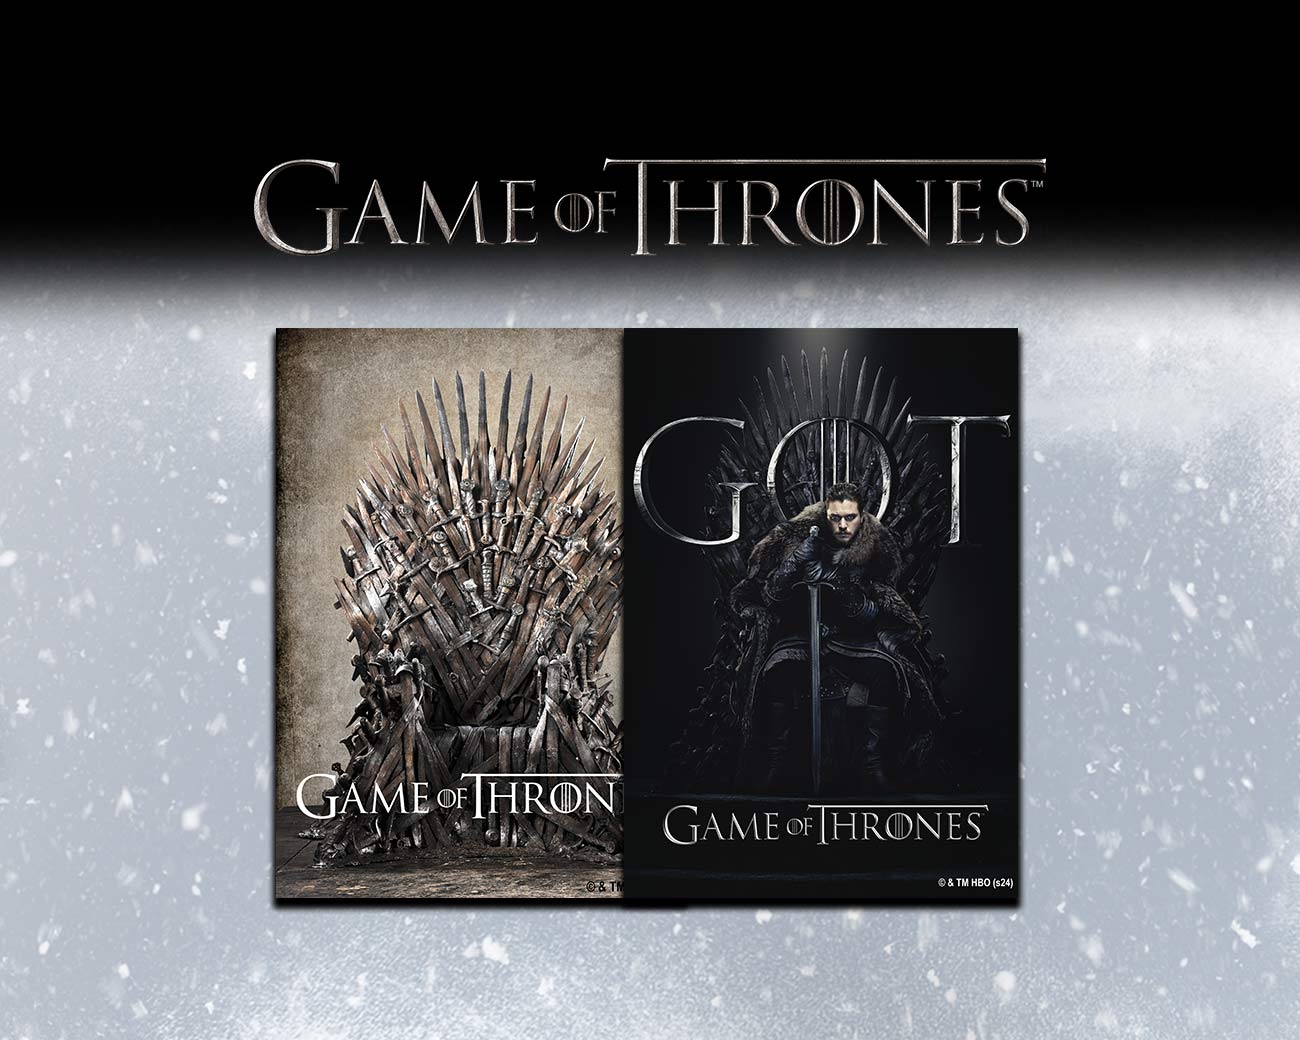 Game Of Thrones Wooden Jigsaw Puzzles - Officially Licensed